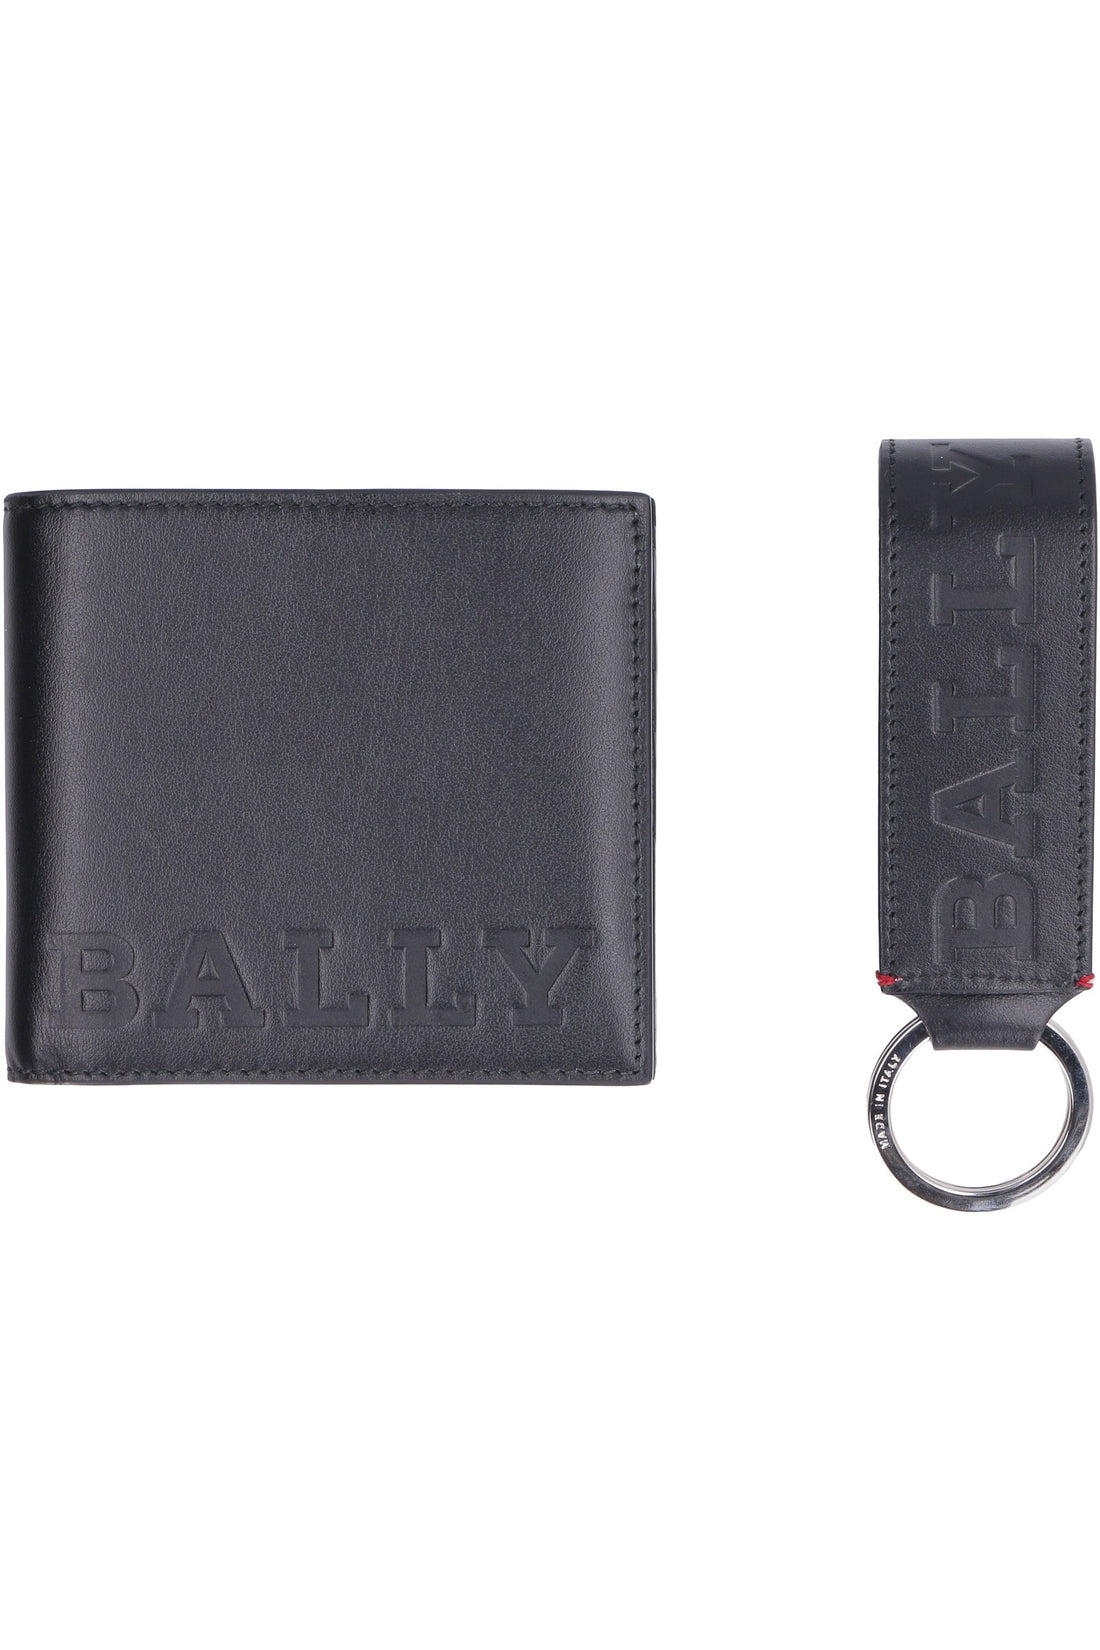 Bally-OUTLET-SALE-Accessory gift box-ARCHIVIST